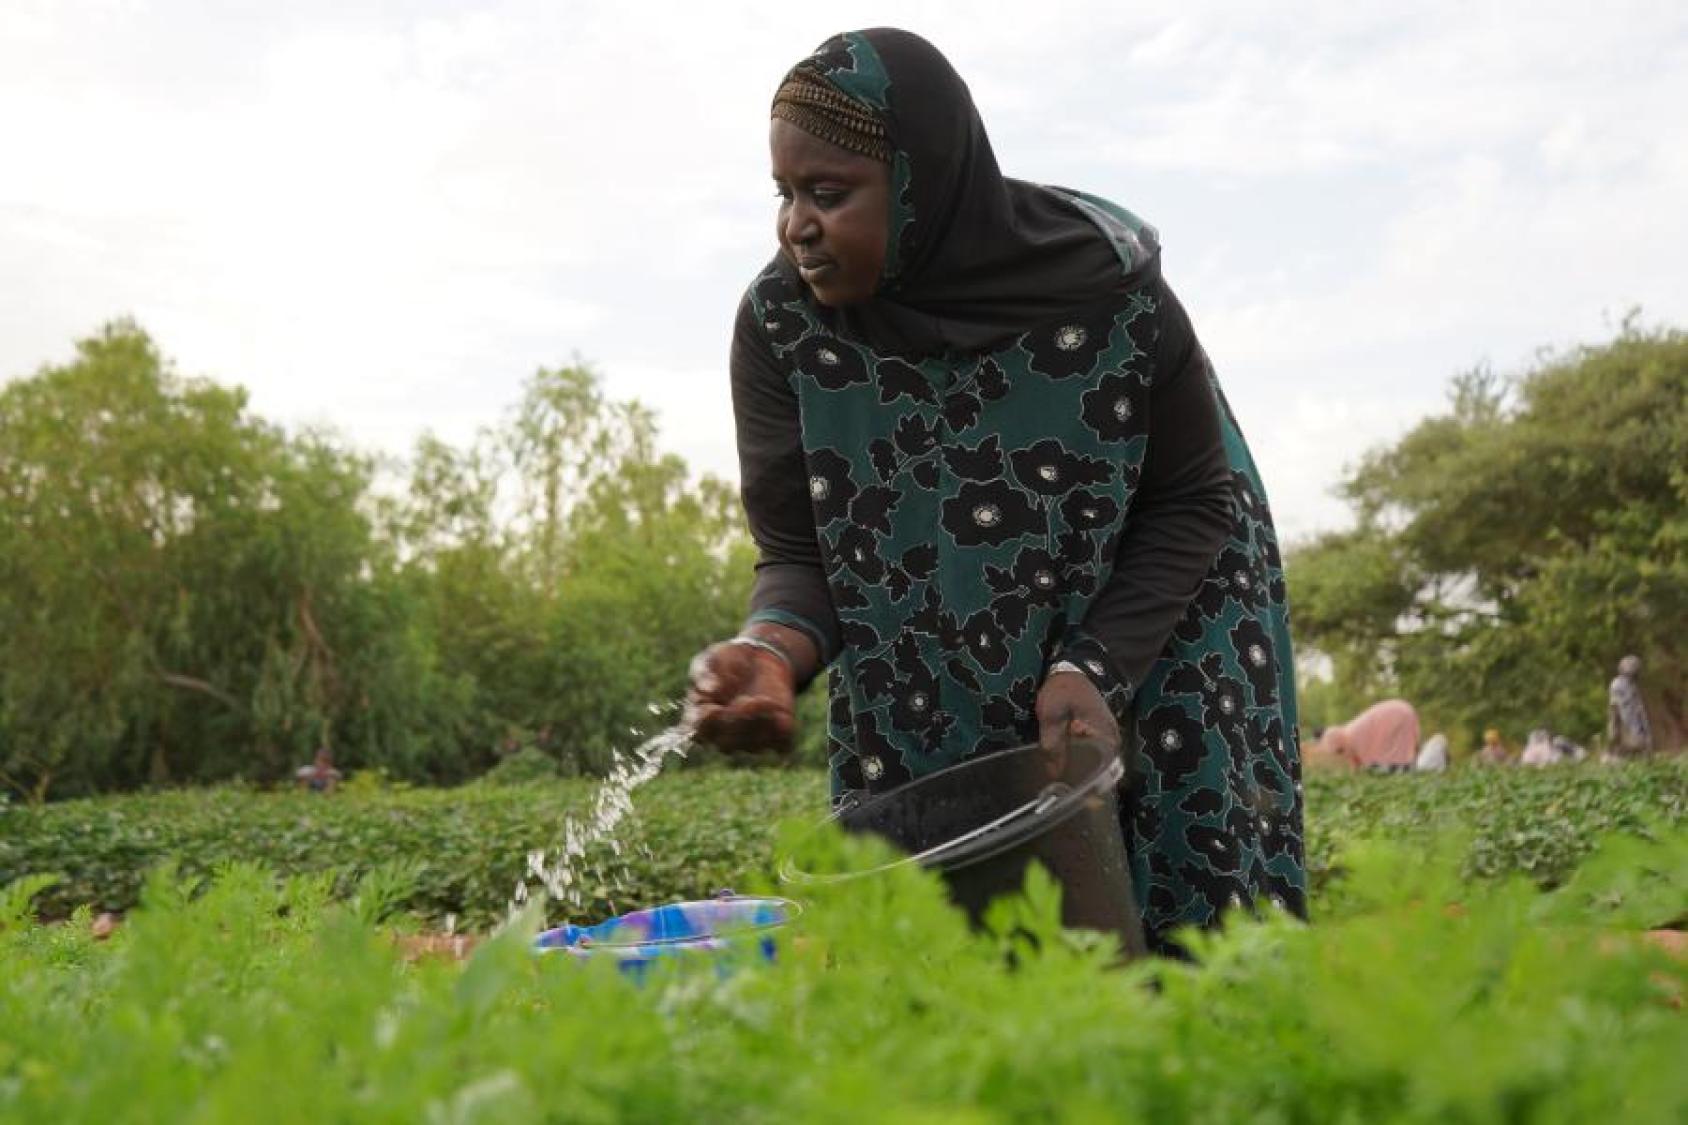 A woman in a black dress and headscarf watering a green farm